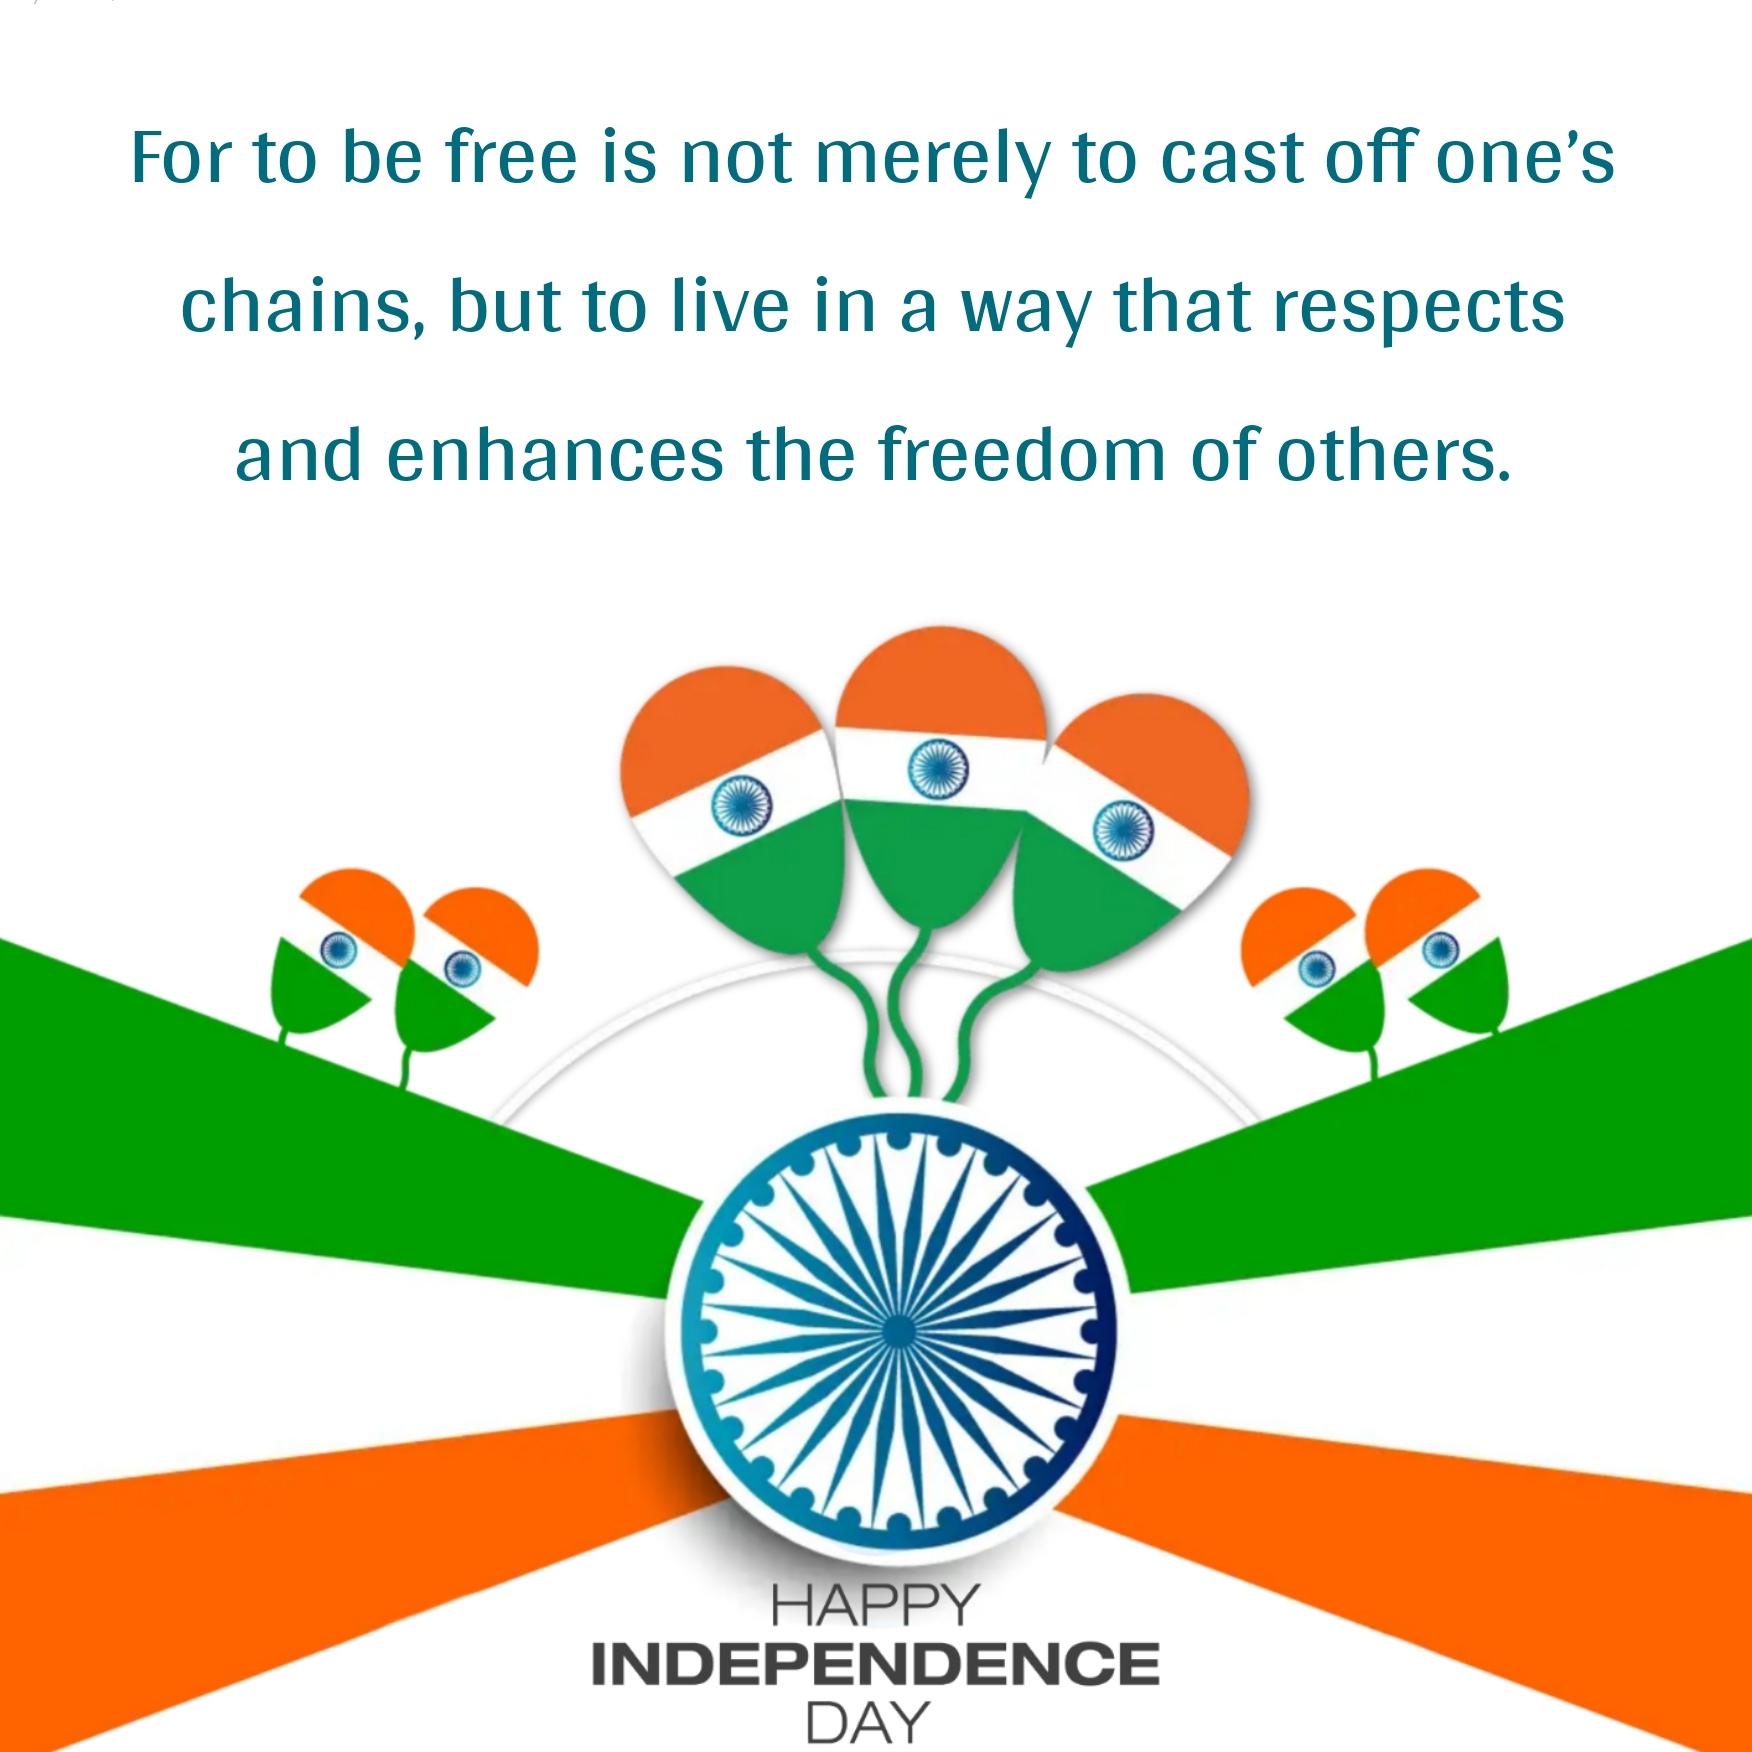 For to be free is not merely to cast off ones chains